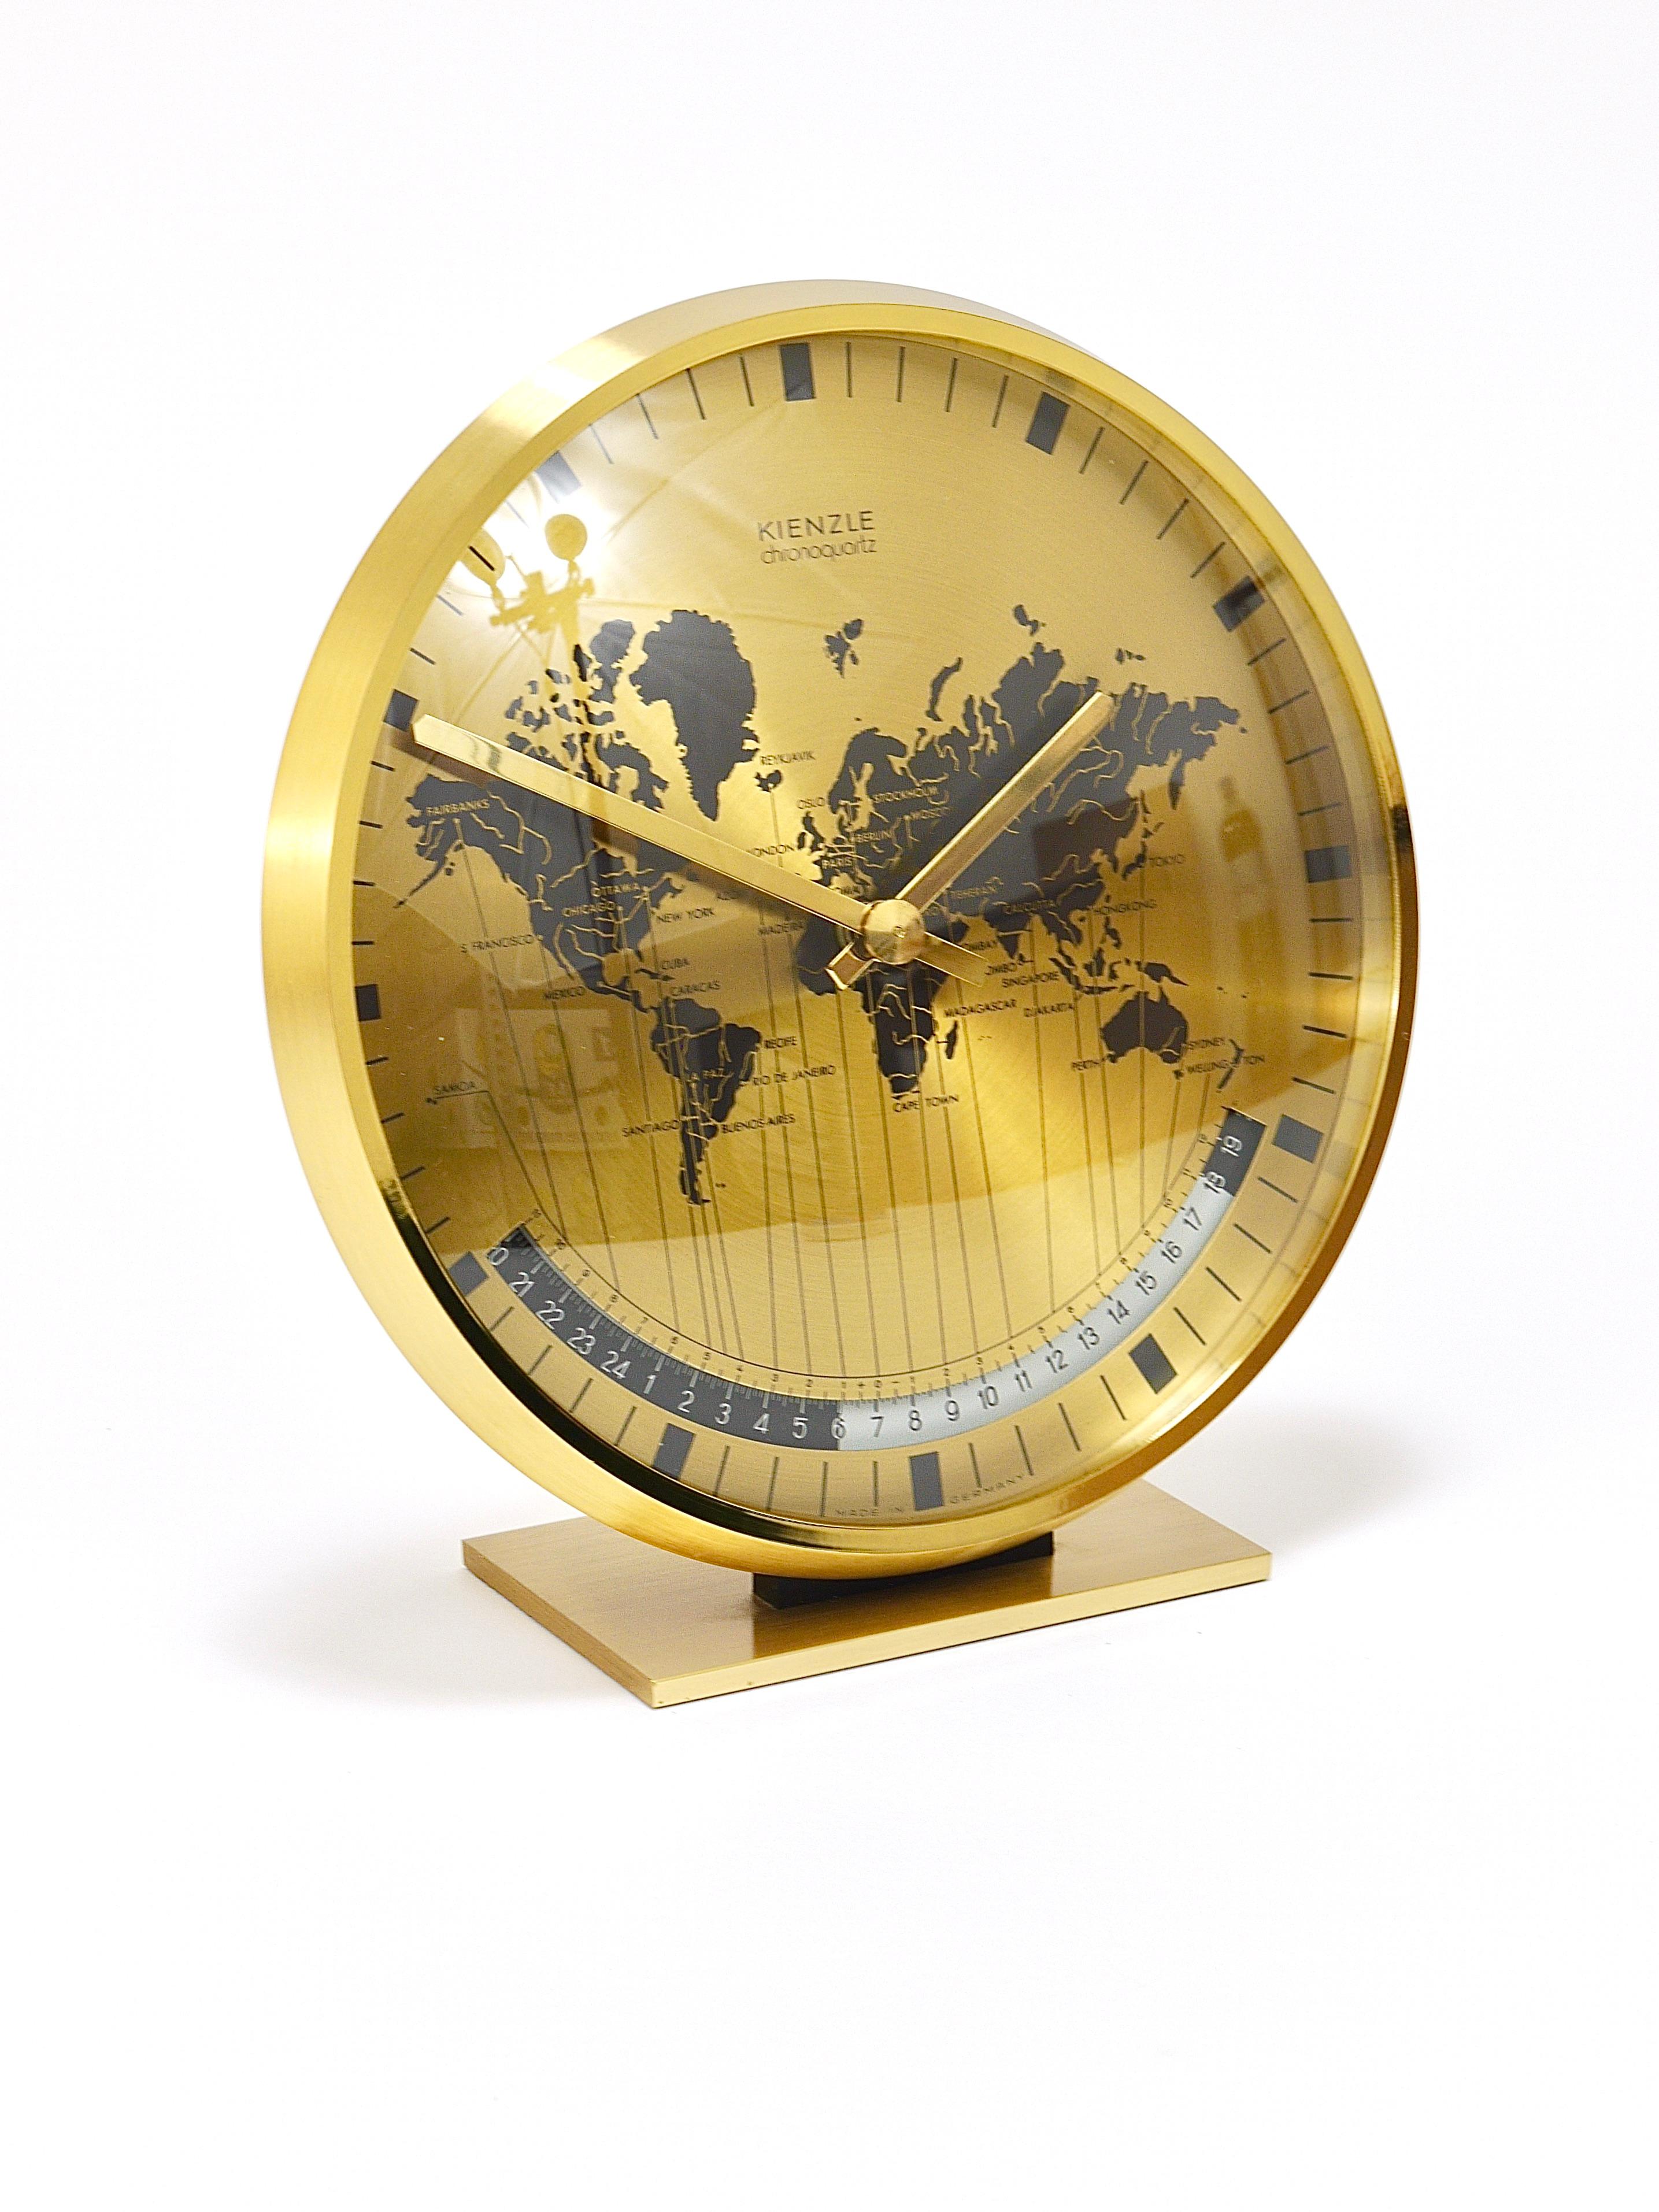 Kienzle GMT World Time Zone Brass Table Clock, Midcentury, Germany, 1960s For Sale 6